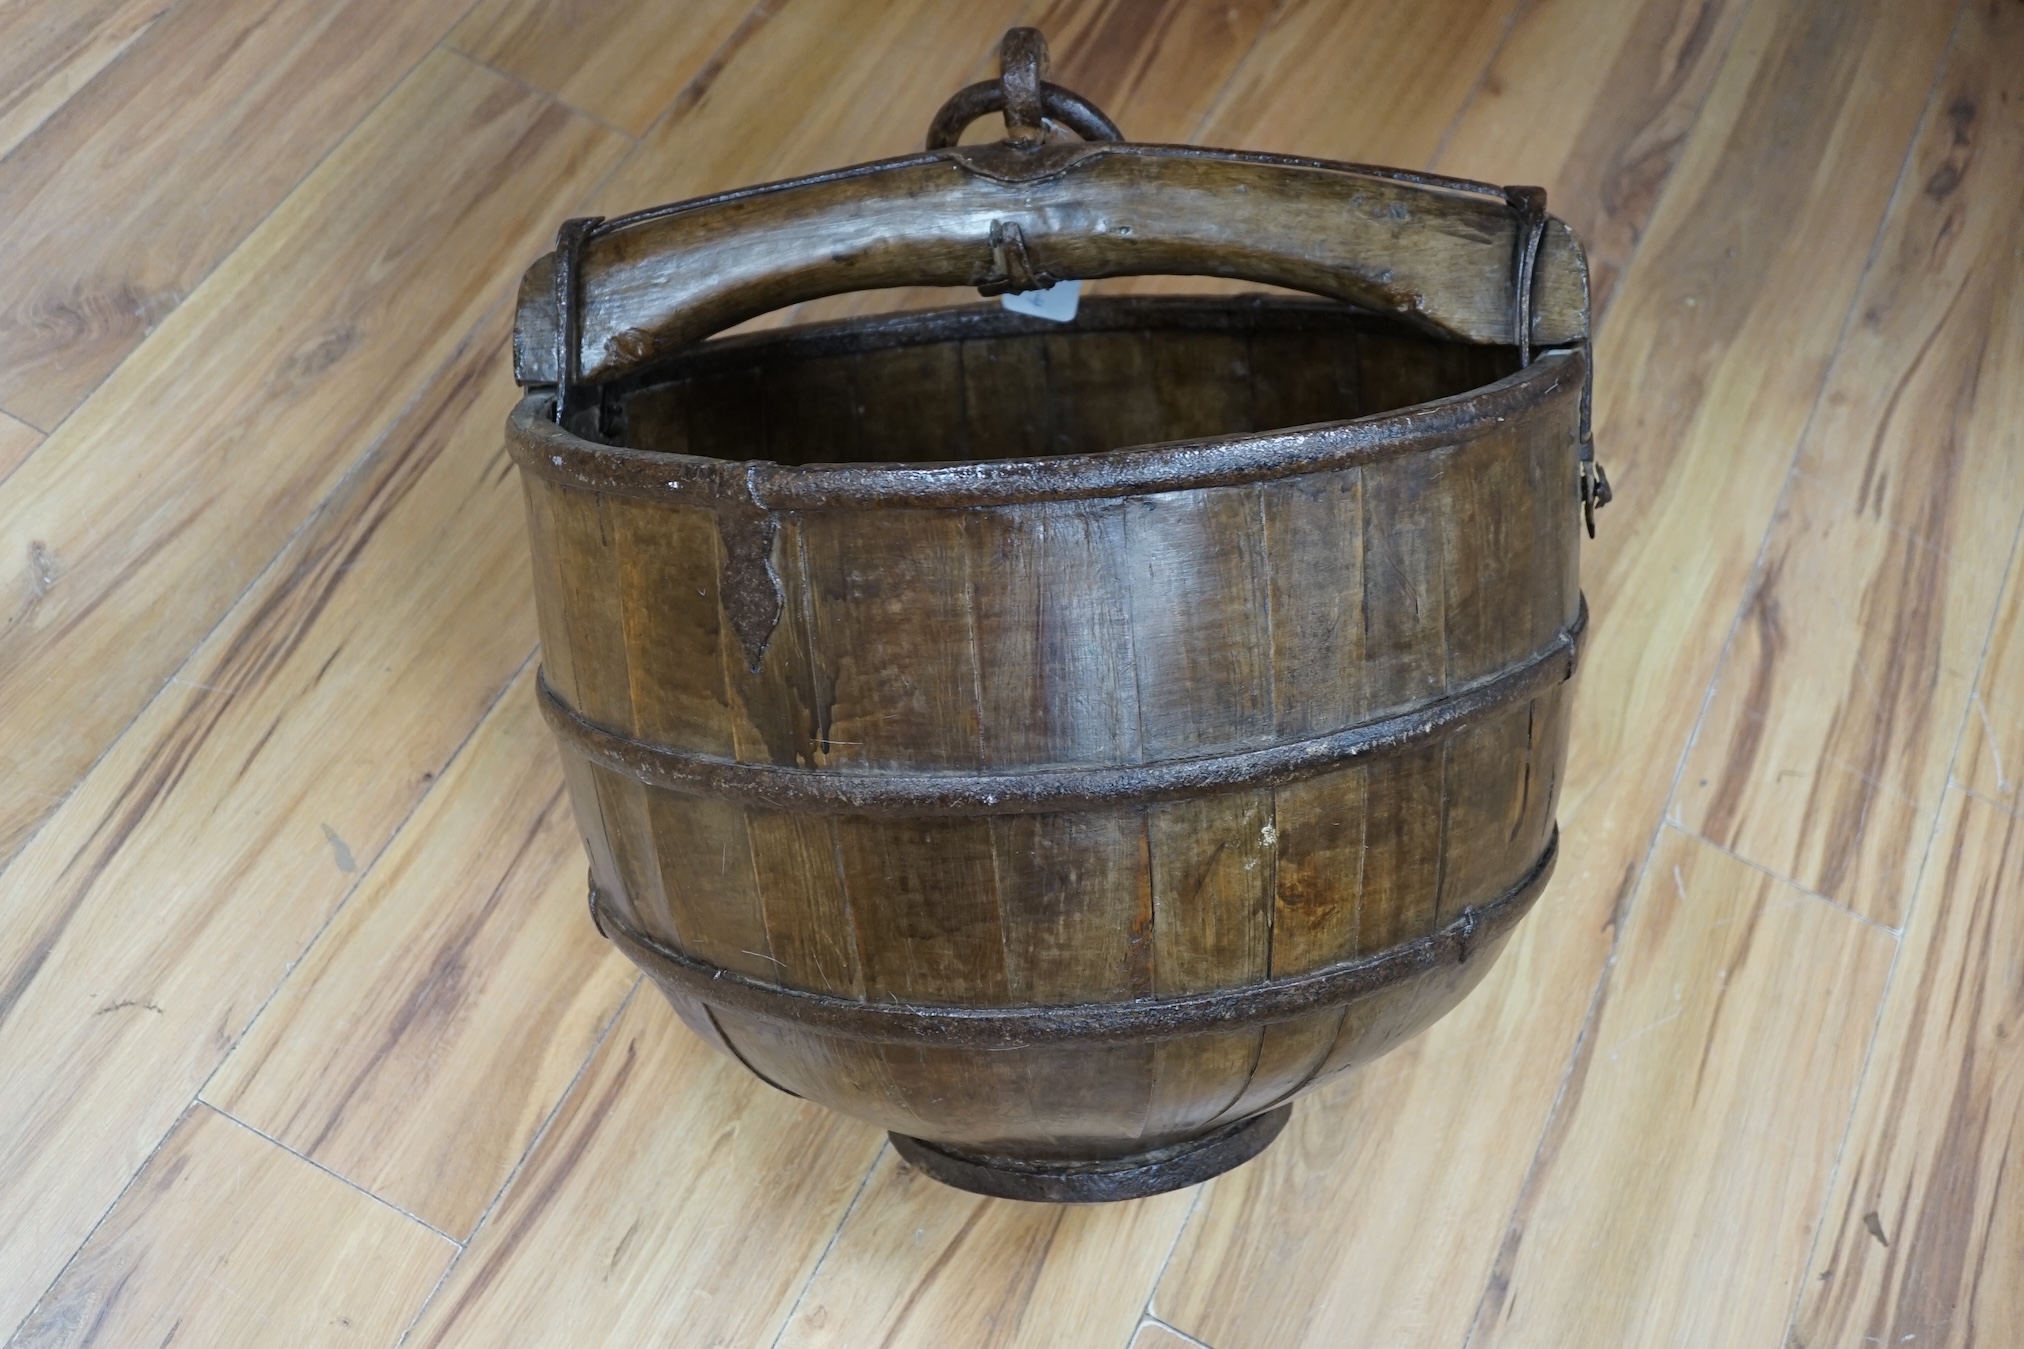 A Chinese coopered well bucket, 60cm high. Condition- fair to good